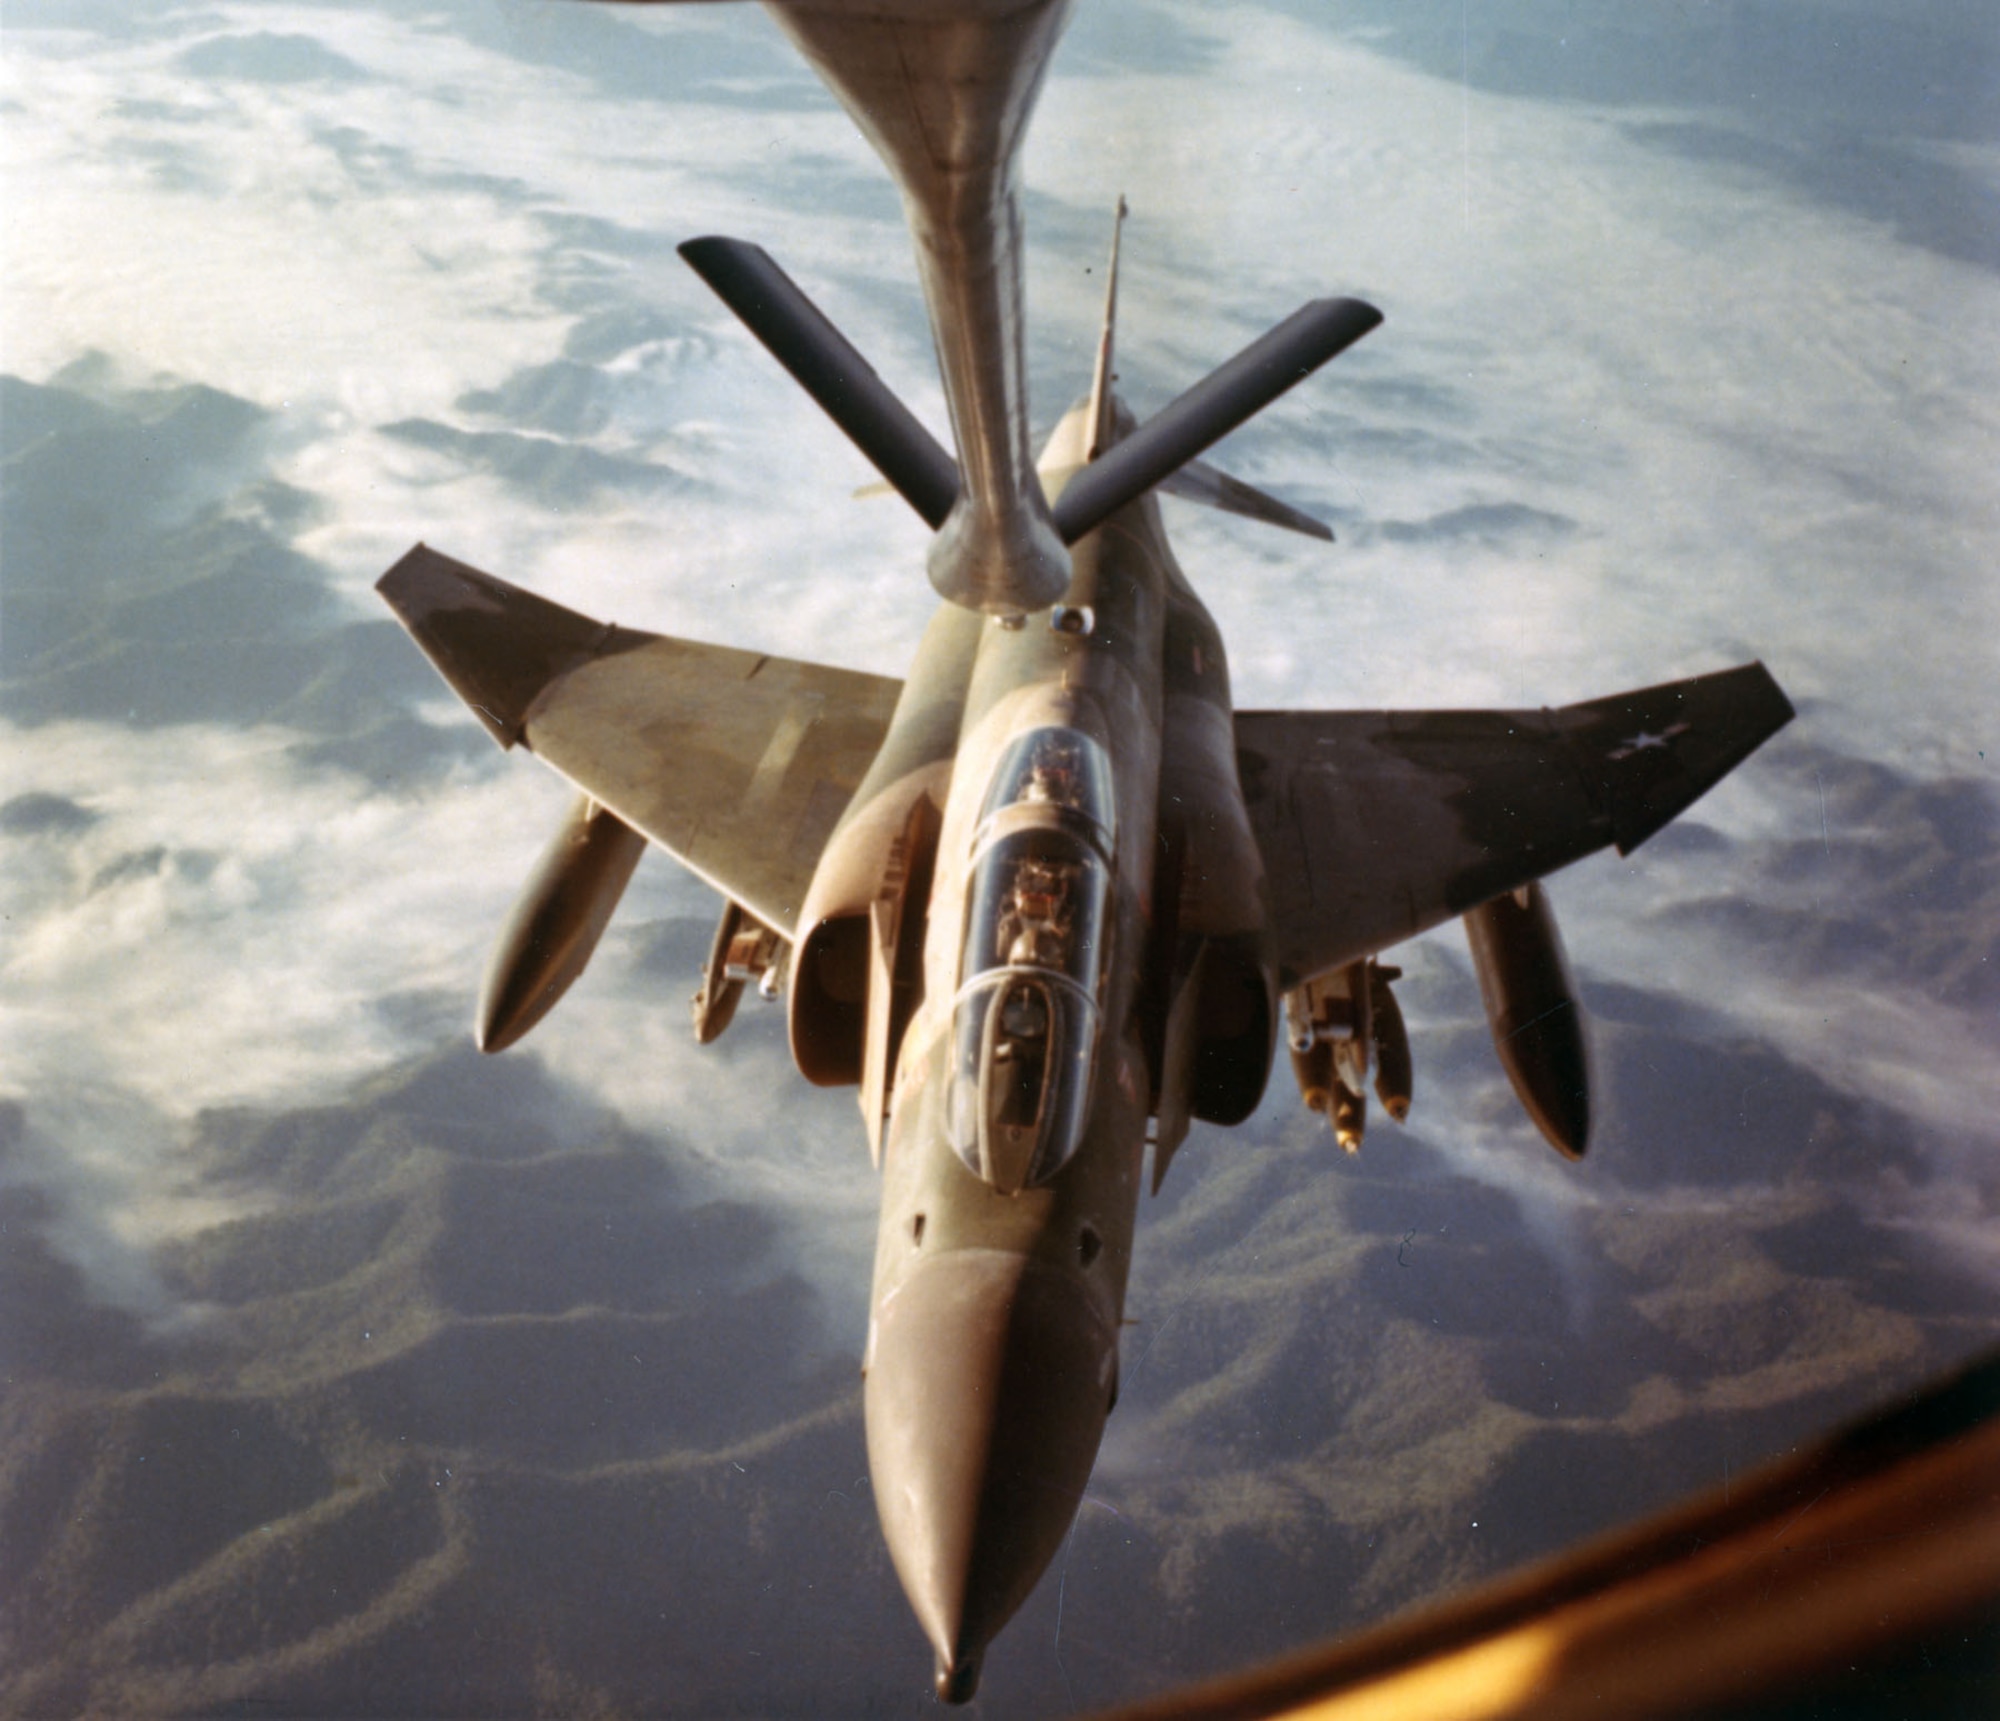 Refueling an F-4 Phantom over rugged Southeast Asian terrain, as seen from the KC-135 boom operator’s point of view, 1967. (U.S. Air Force photo)